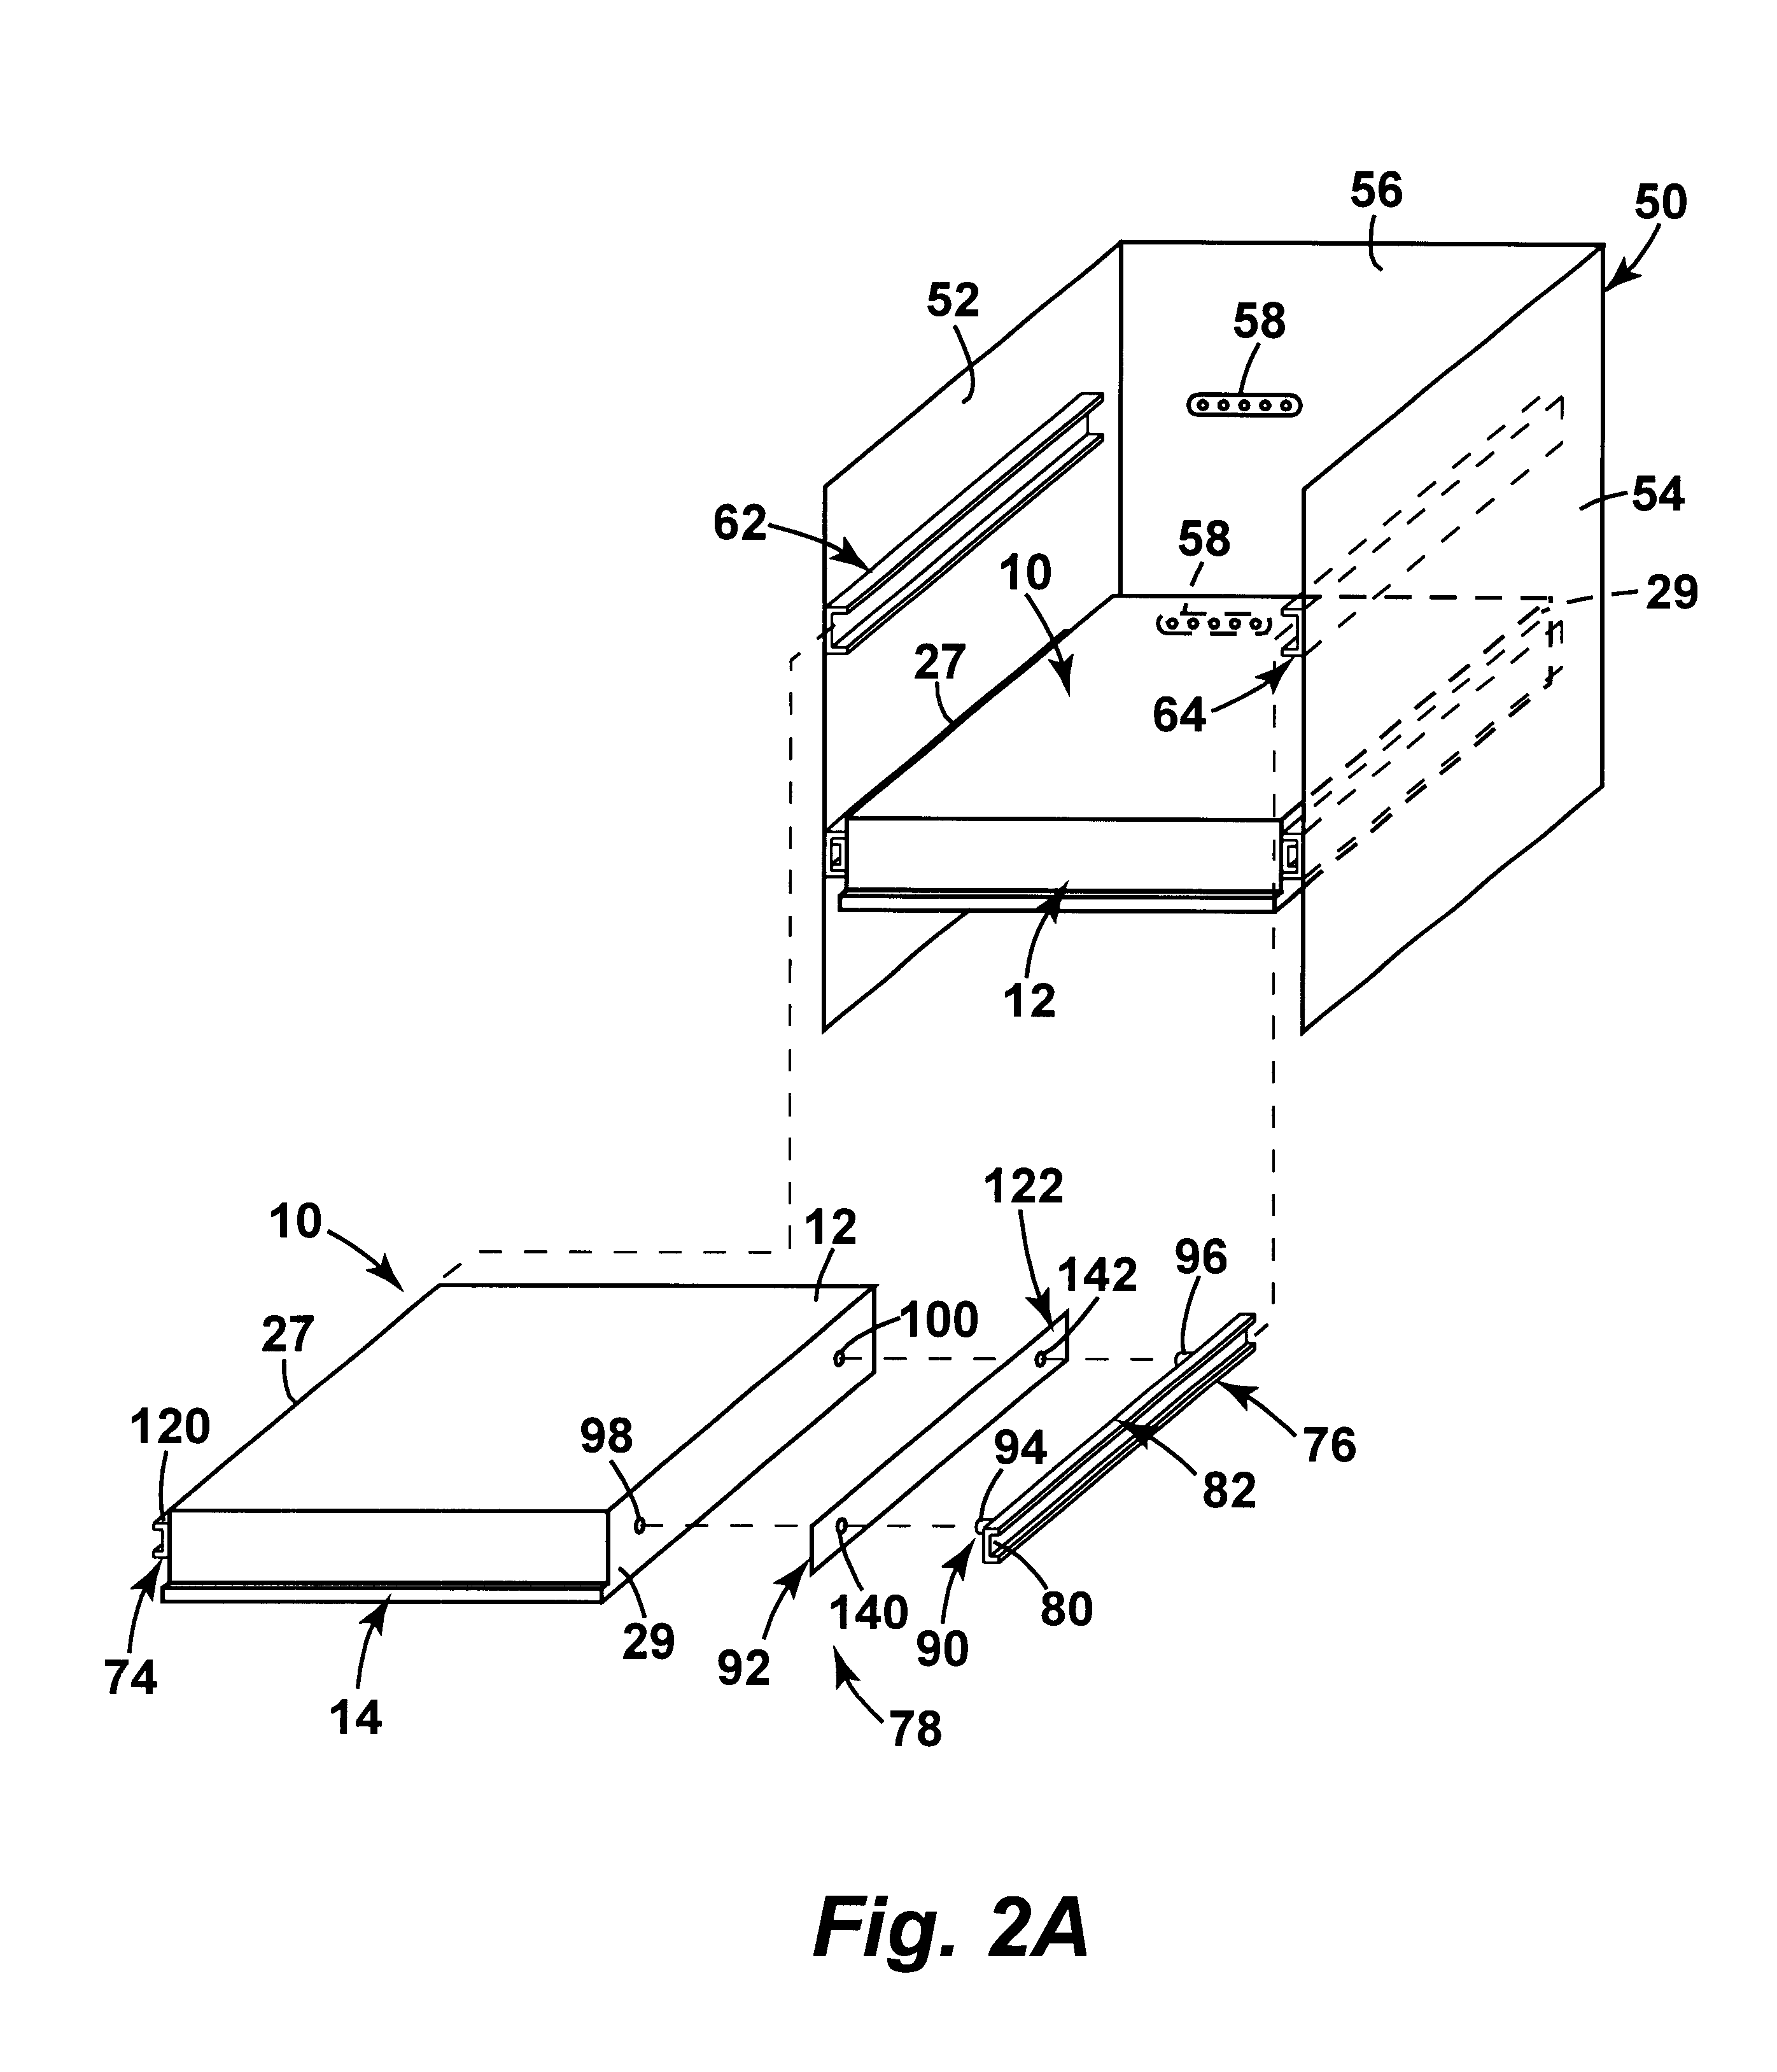 Disk drive including resilient securing system providing relative movement between side rails and head disk assembly to accommodate side rails engaging guide channels in a chassis